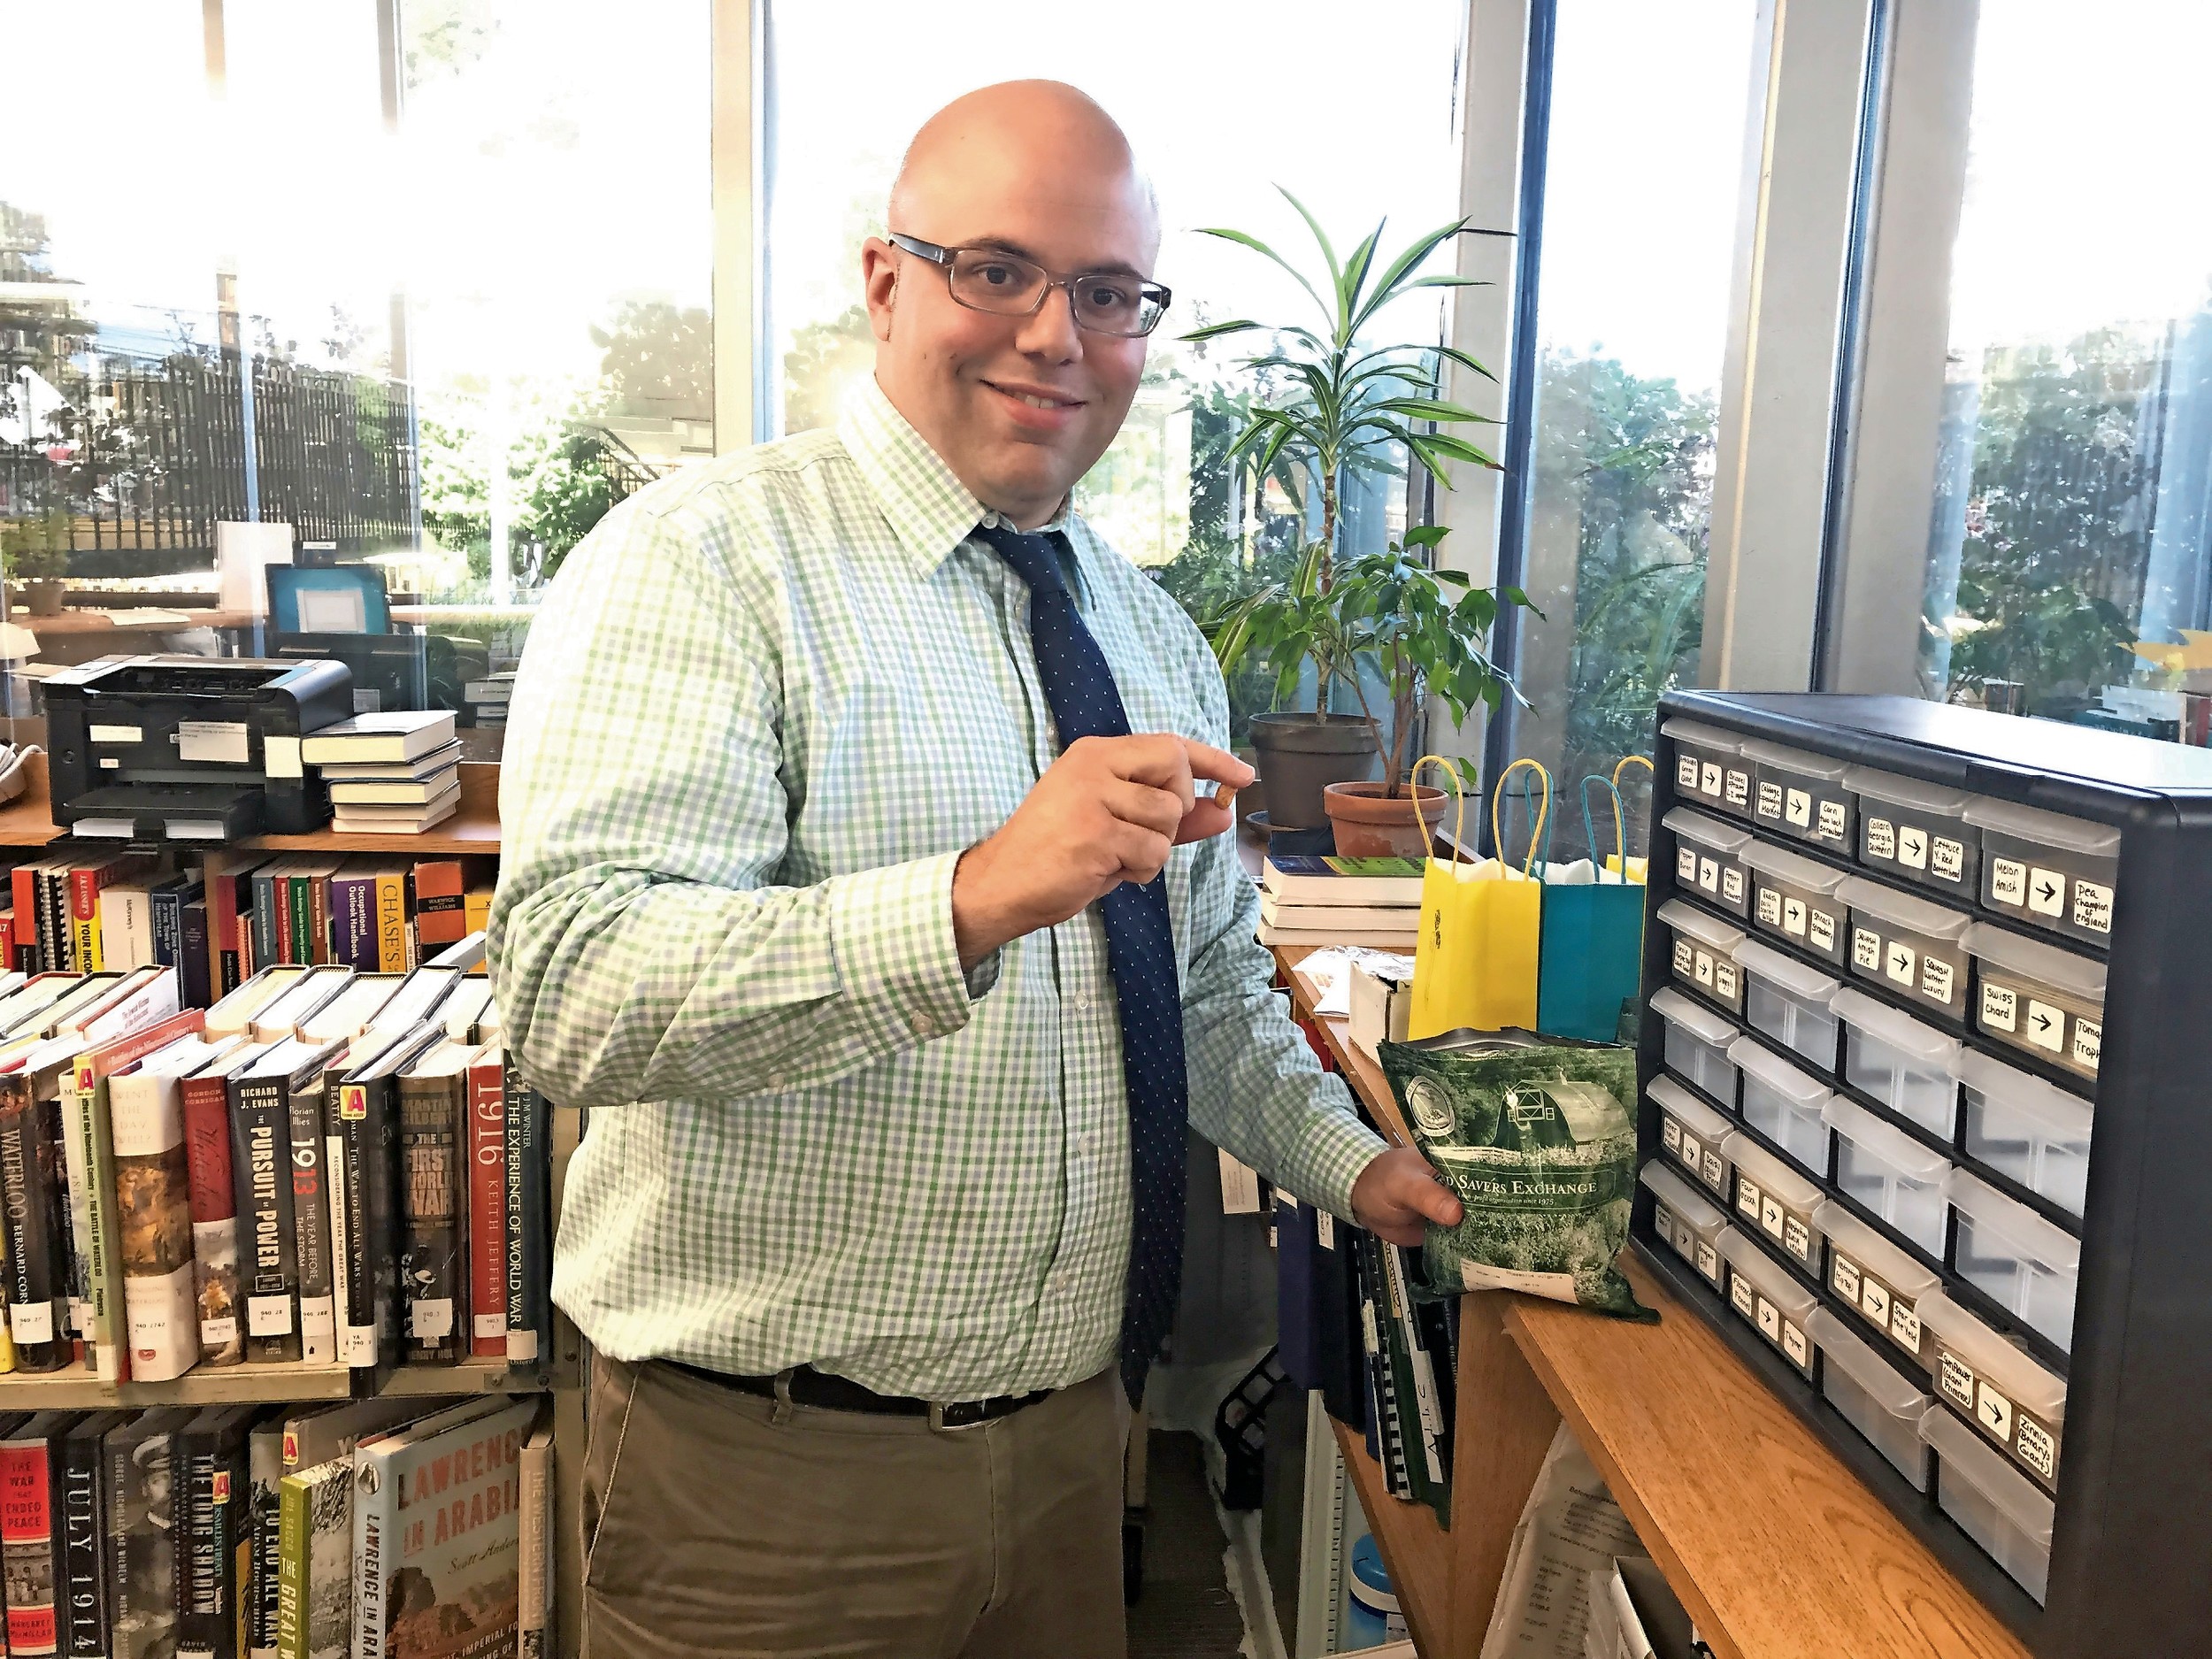 Ian Smith, head of reference, developed the seed library in Wantagh.